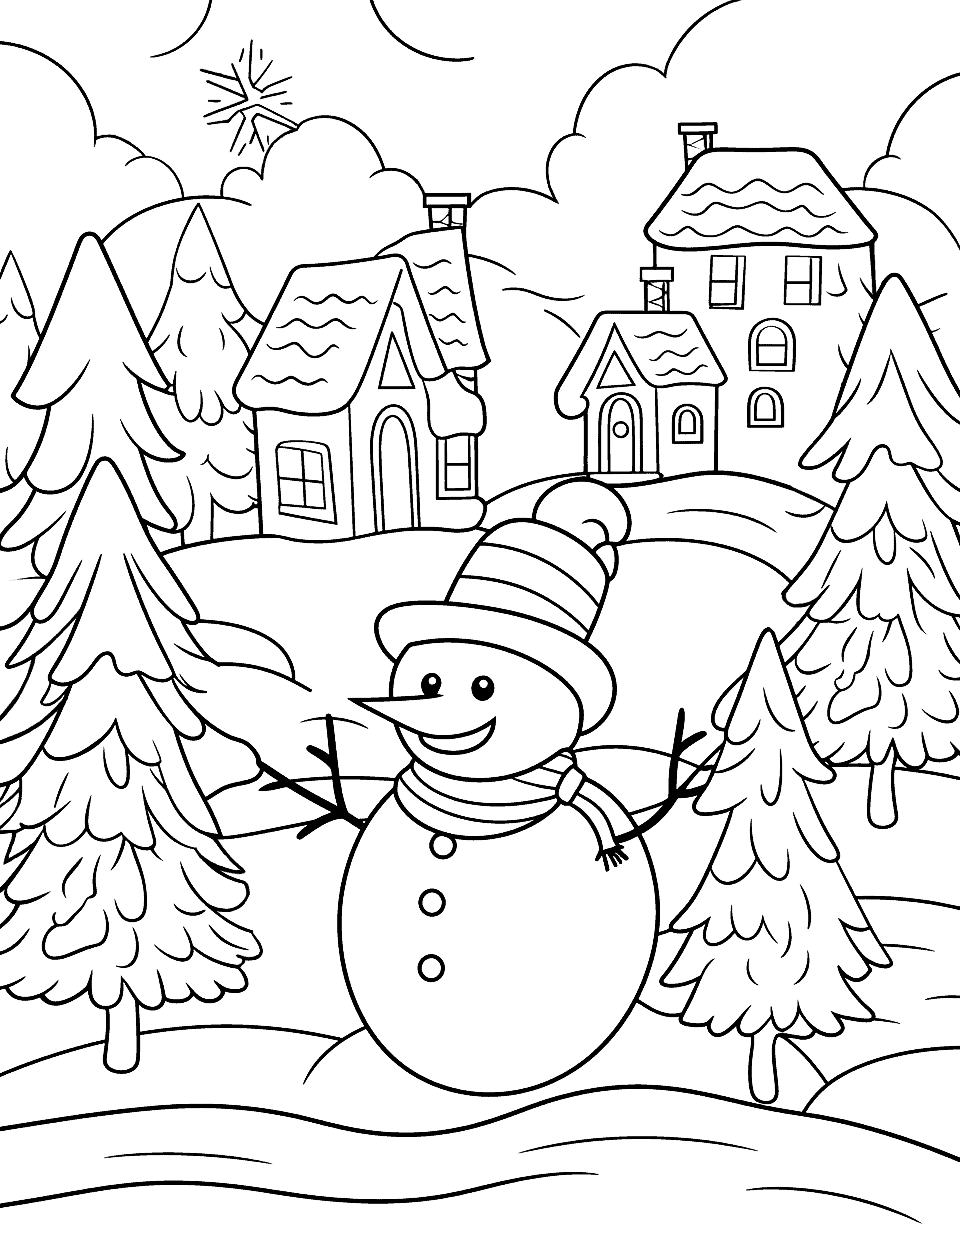 Winter Wonderland Scene Coloring Page - A magical winter wonderland with snow-covered houses and trees.